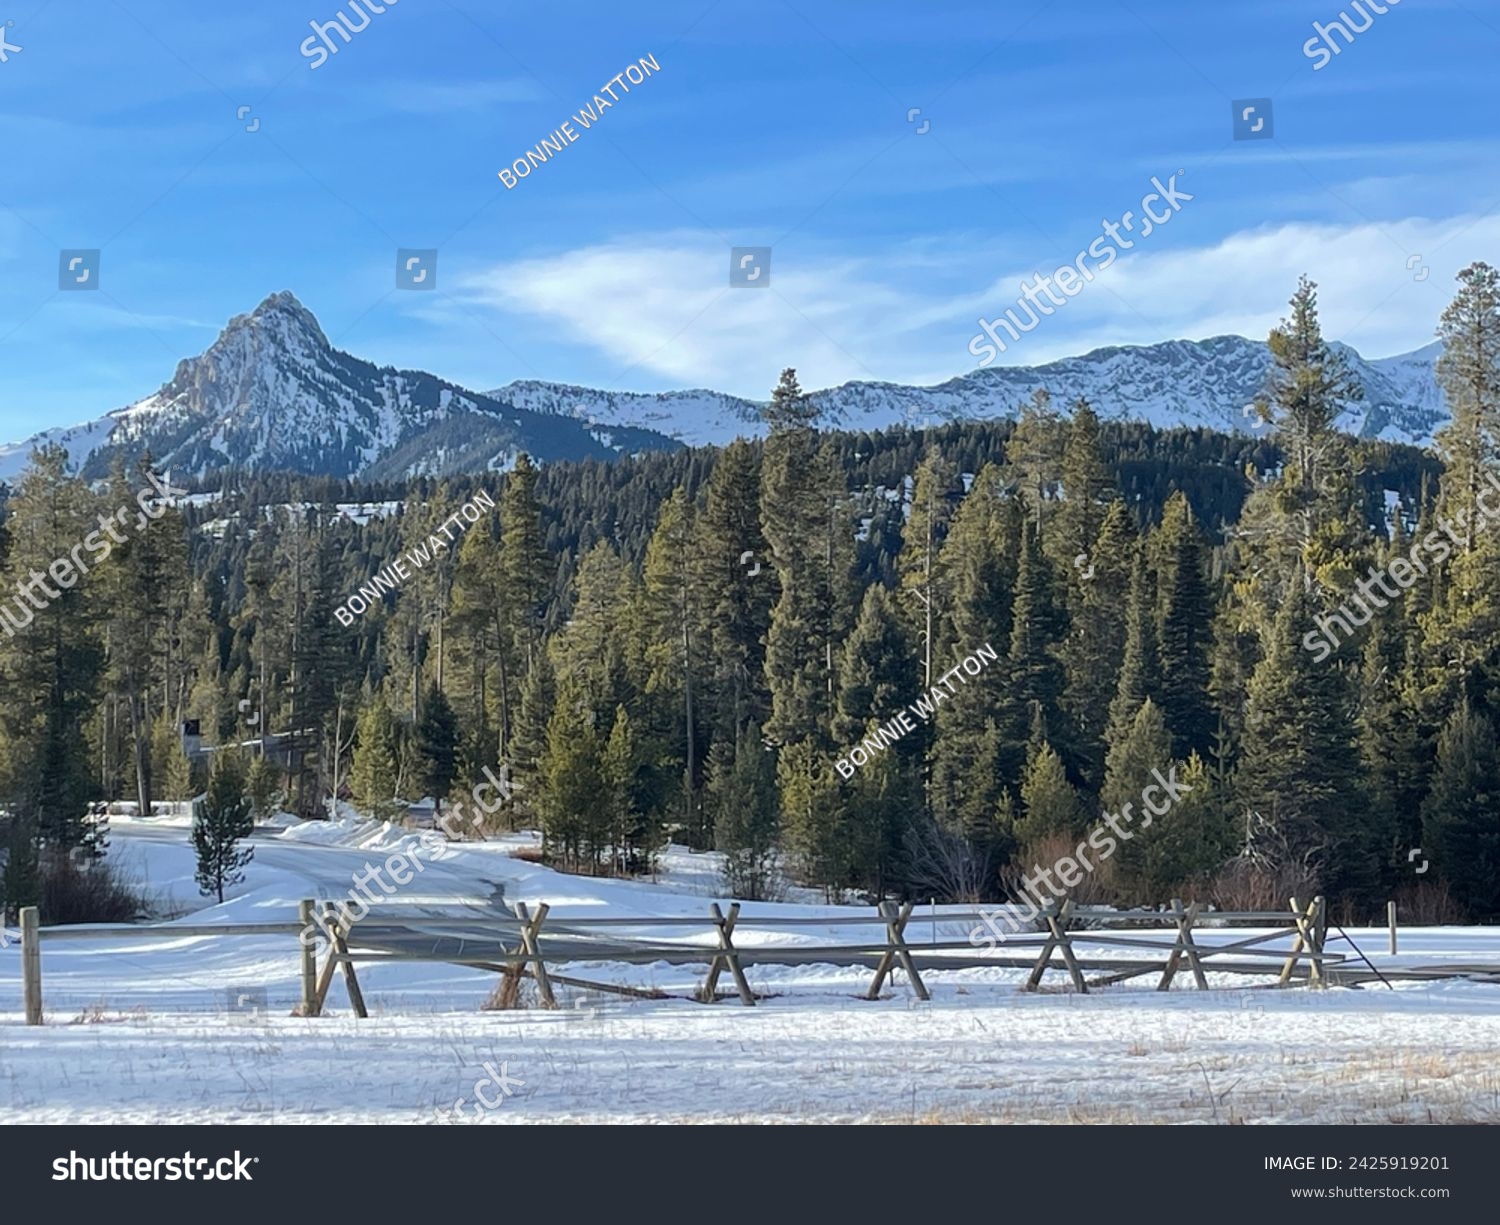 Winter mountain landscape with split rail fence along the road, row of evergreen trees and beautiful mountain peak in the distance #2425919201